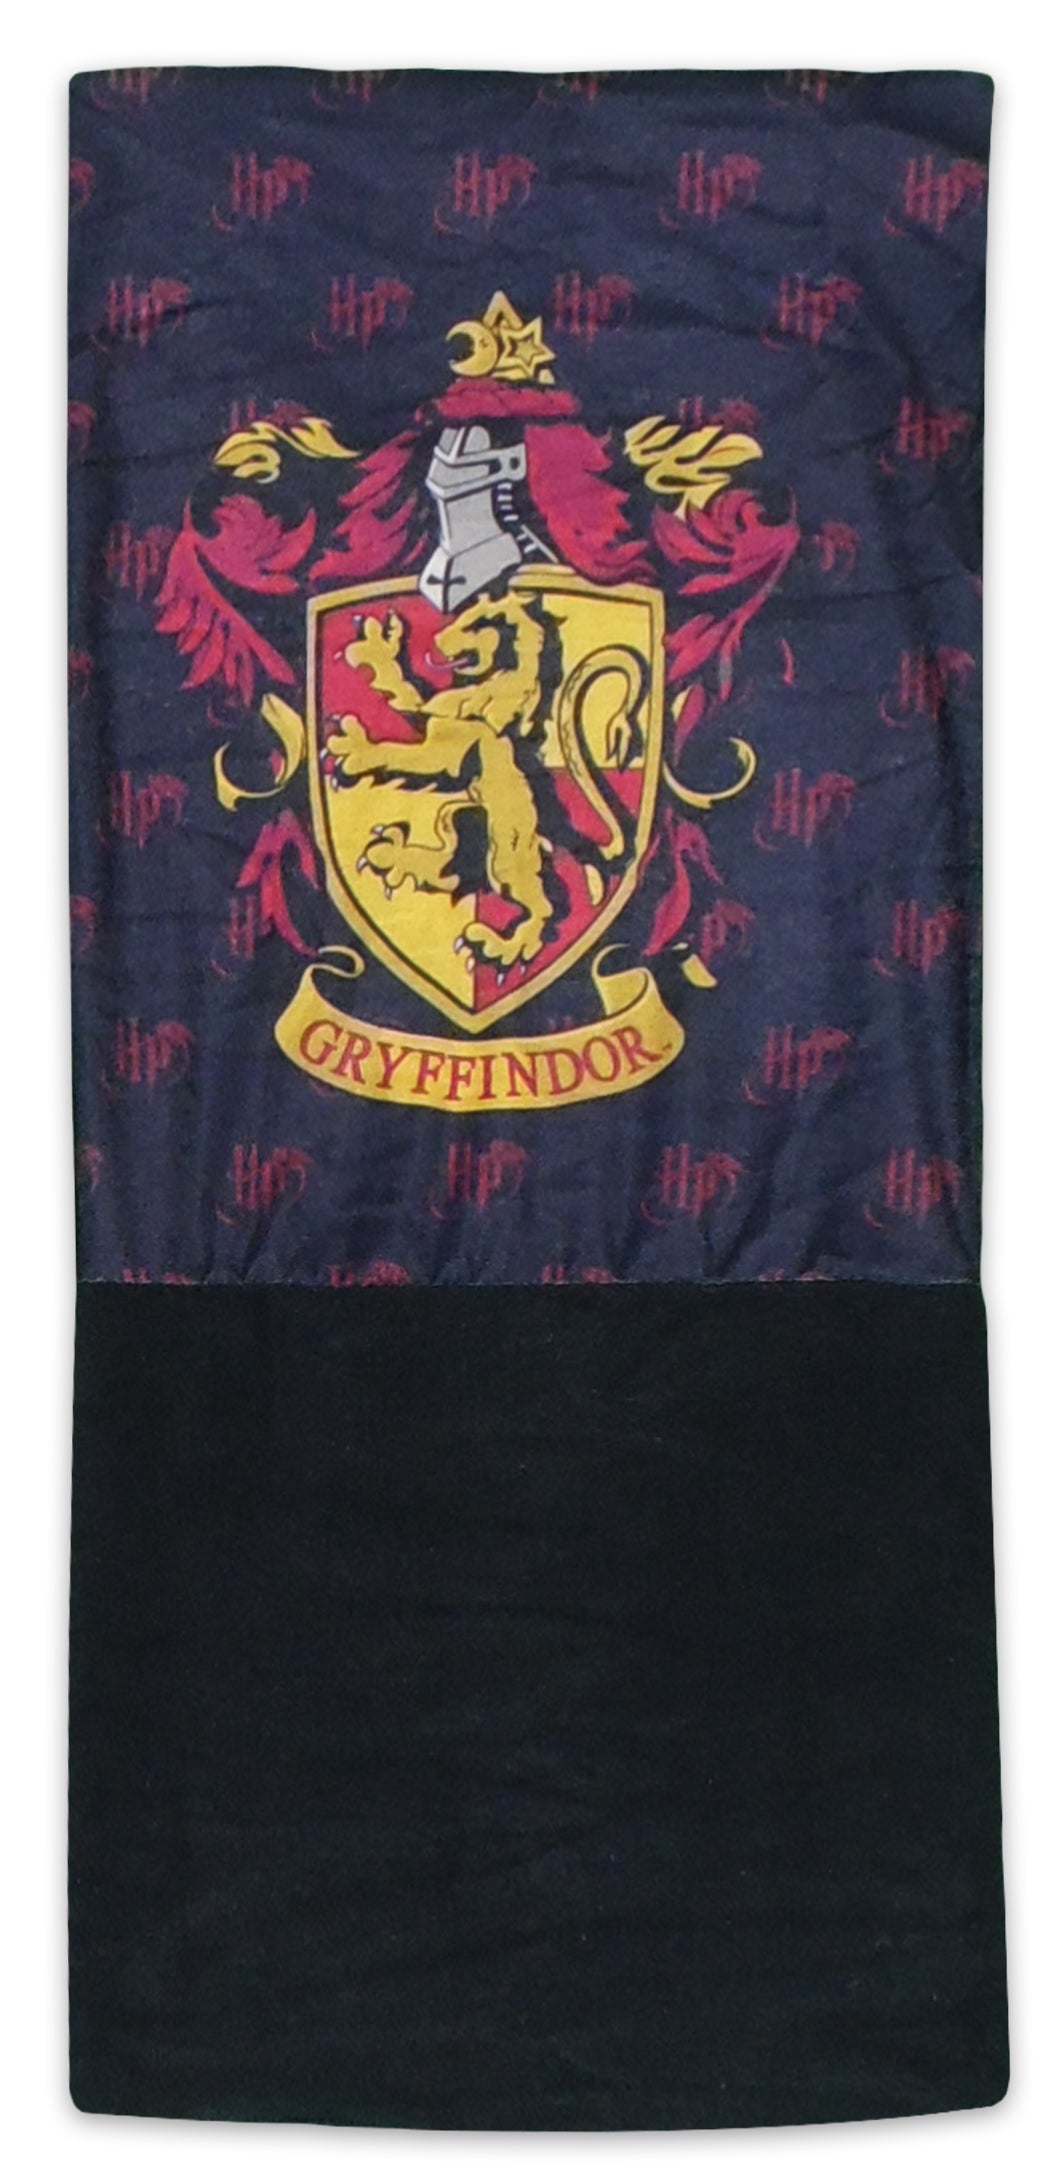 Authentic HARRY POTTER Kids Polyester Fleece Scarf Snood – Shoppe 'N' Smile